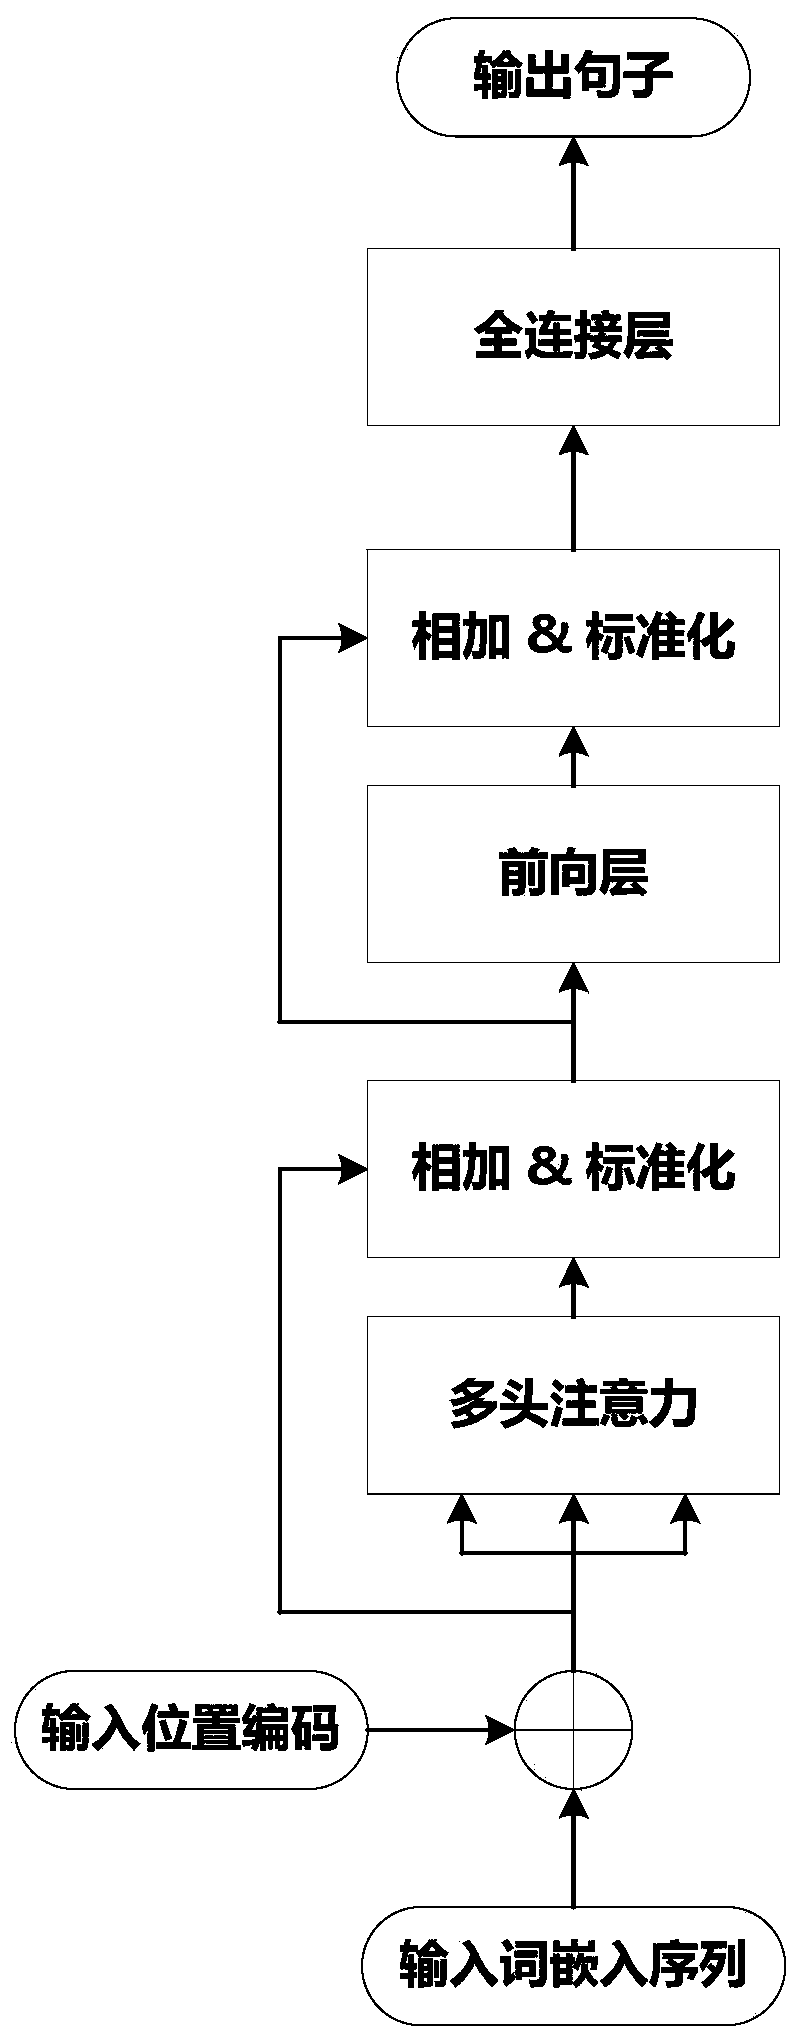 Improved end-to-end speech recognition method